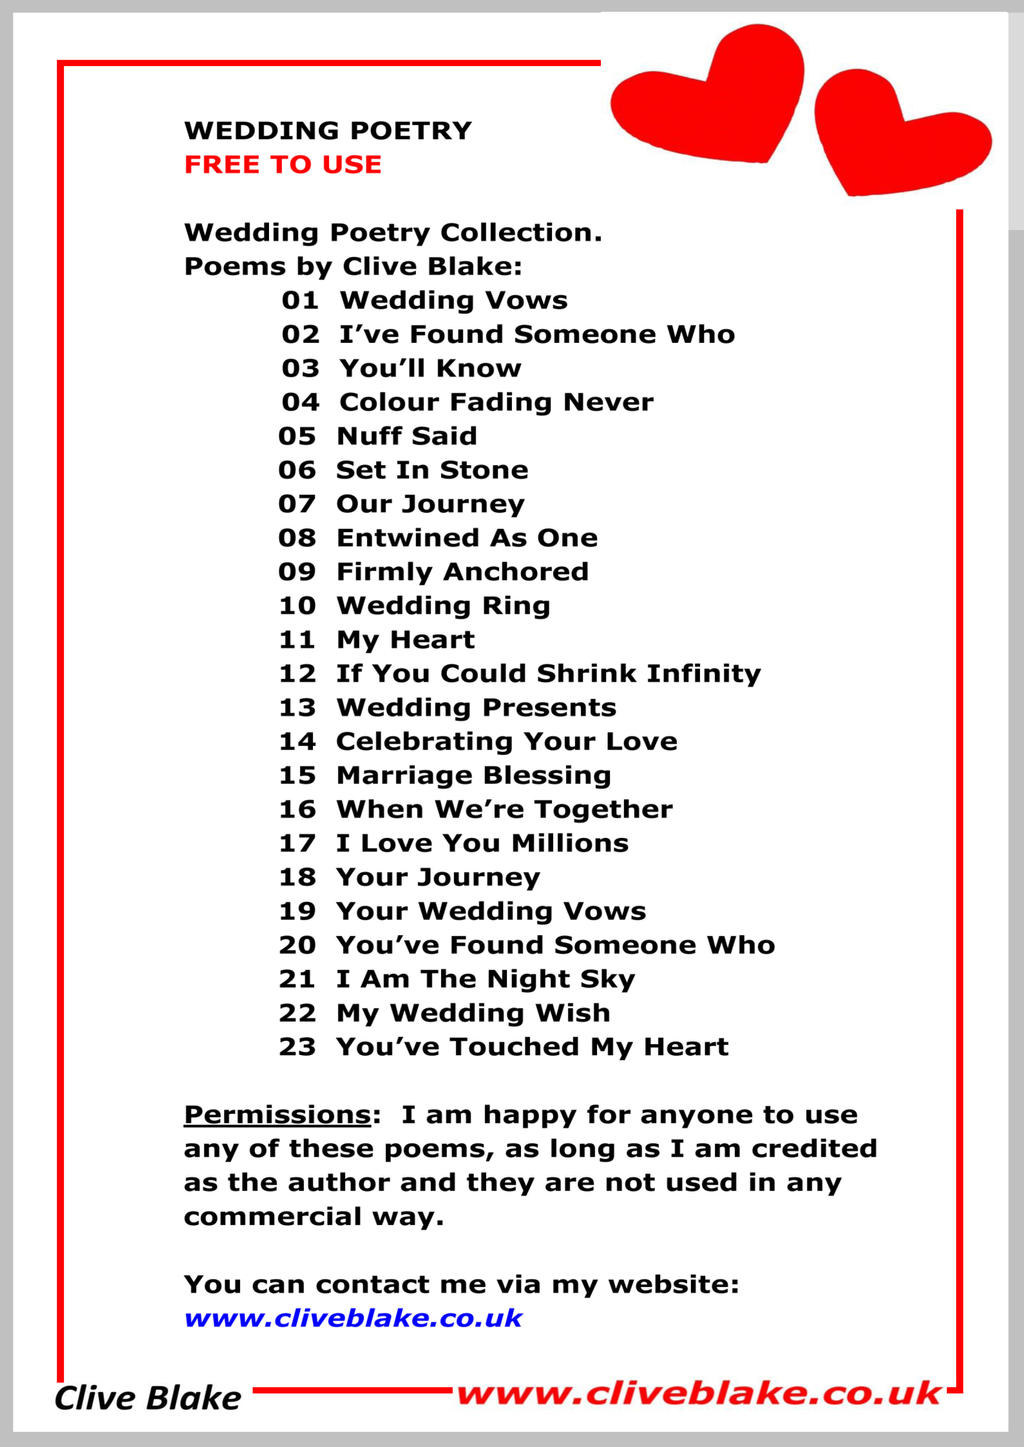 list of poetry wedding poems free to use a poem by cliveblake ddd3fub fullview